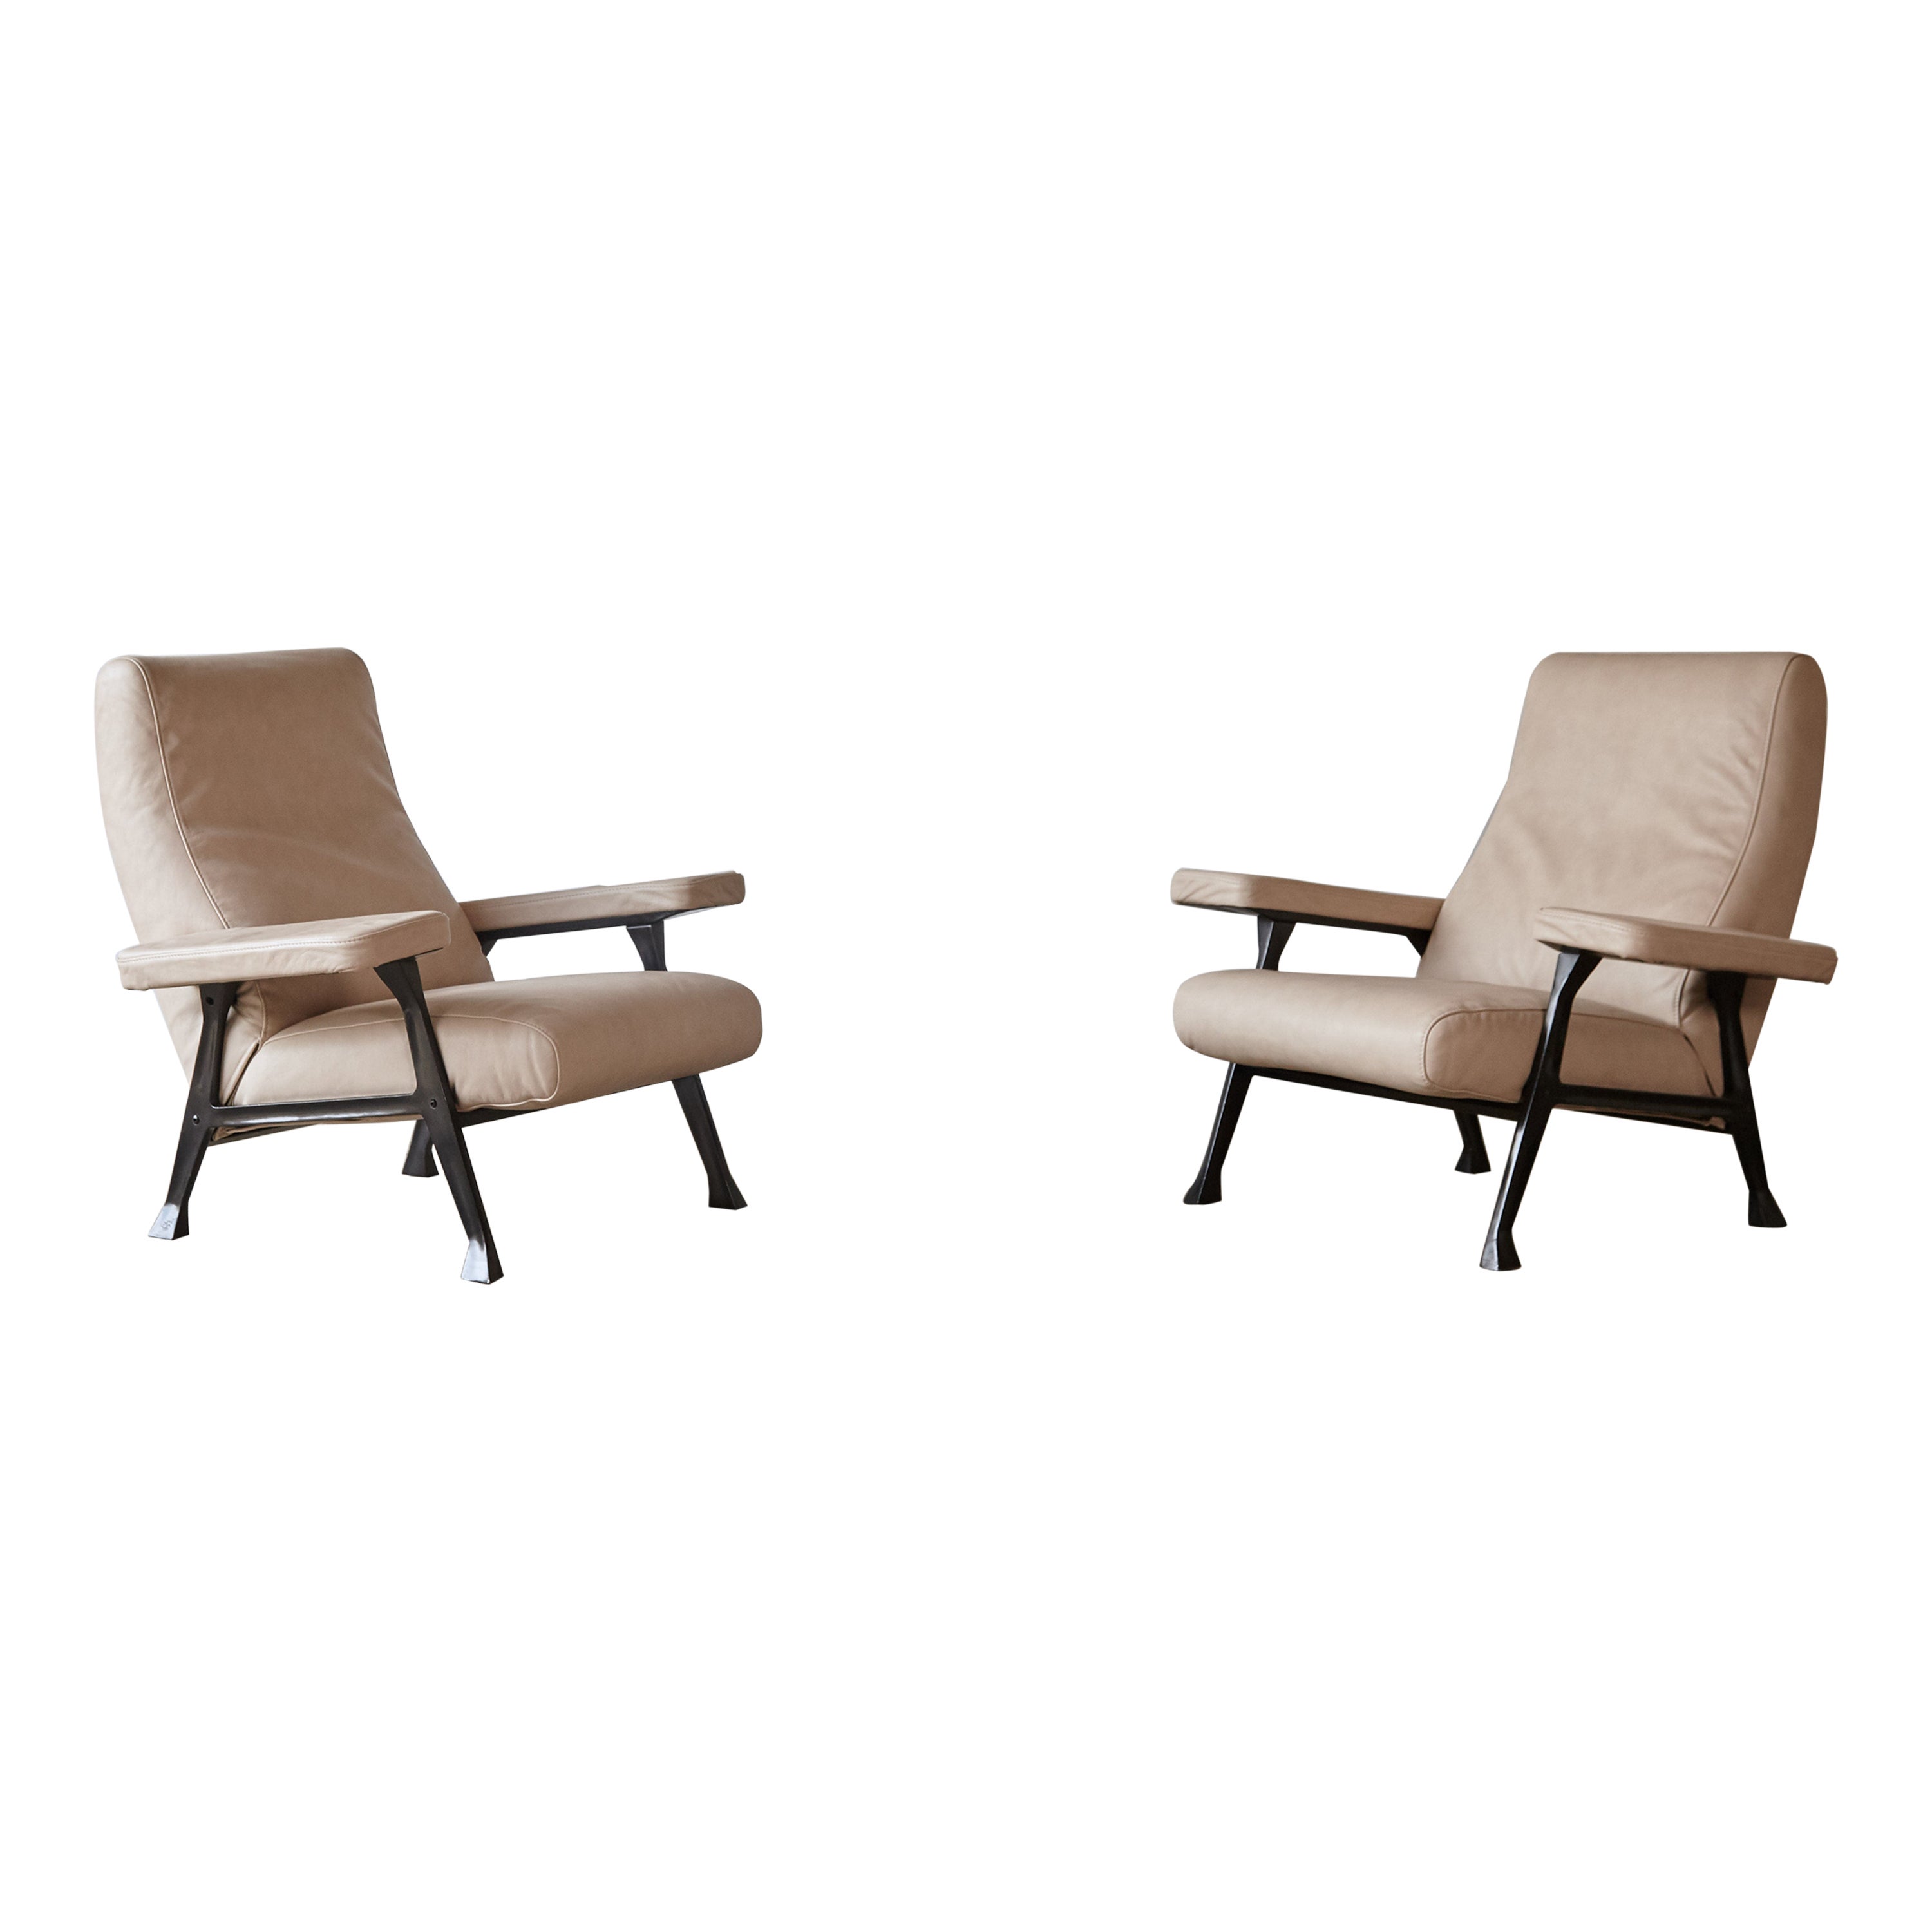 Rare Pair of Authentic 1950s Roberto Menghi Hall Chairs, Arflex, Italy